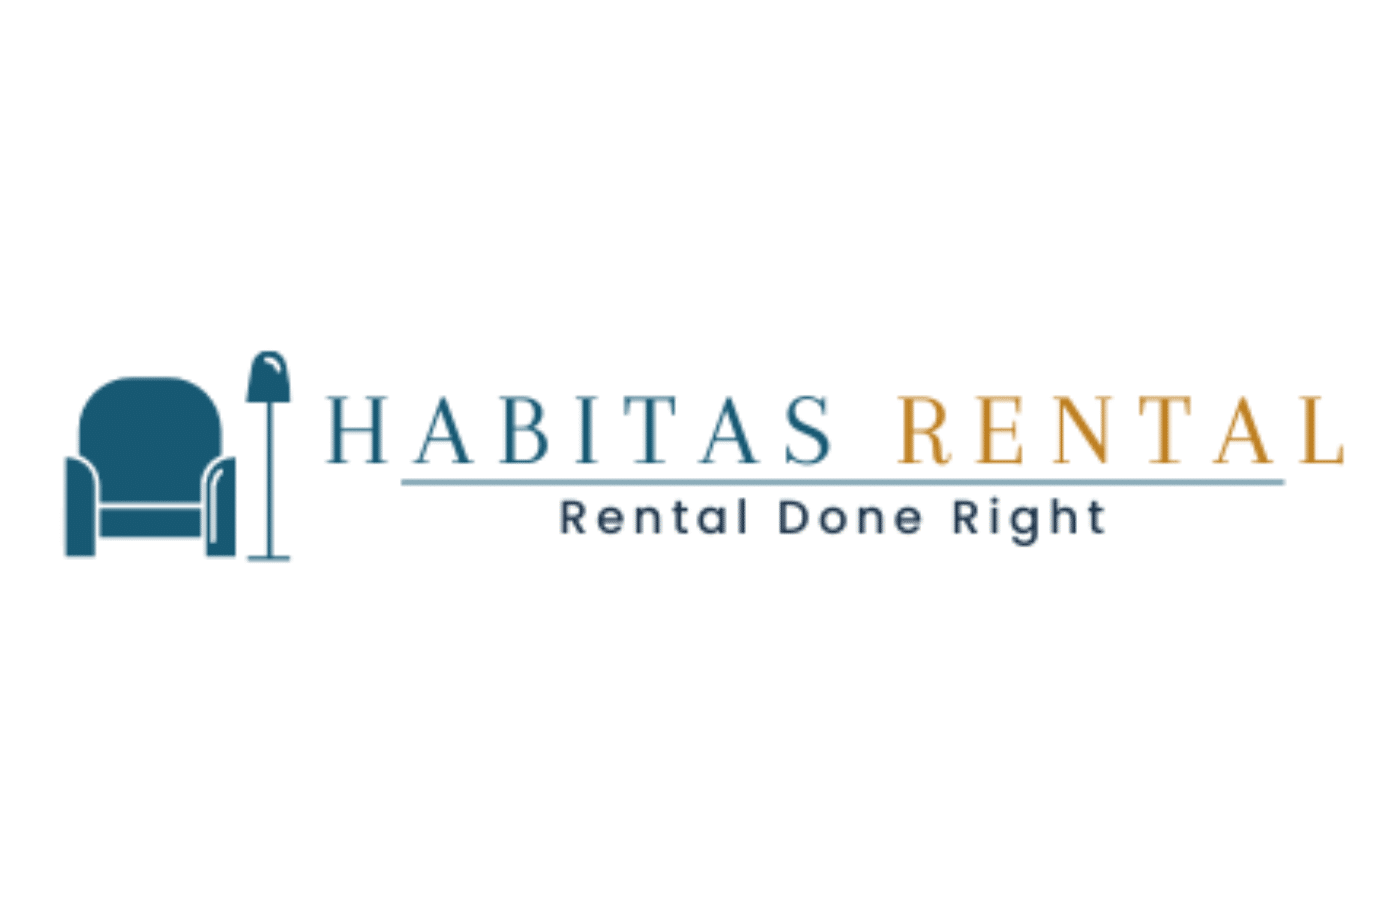 Habitas Rental Announces Winner of Prize Offered at Corporate Housing Providers Association’s Connect24